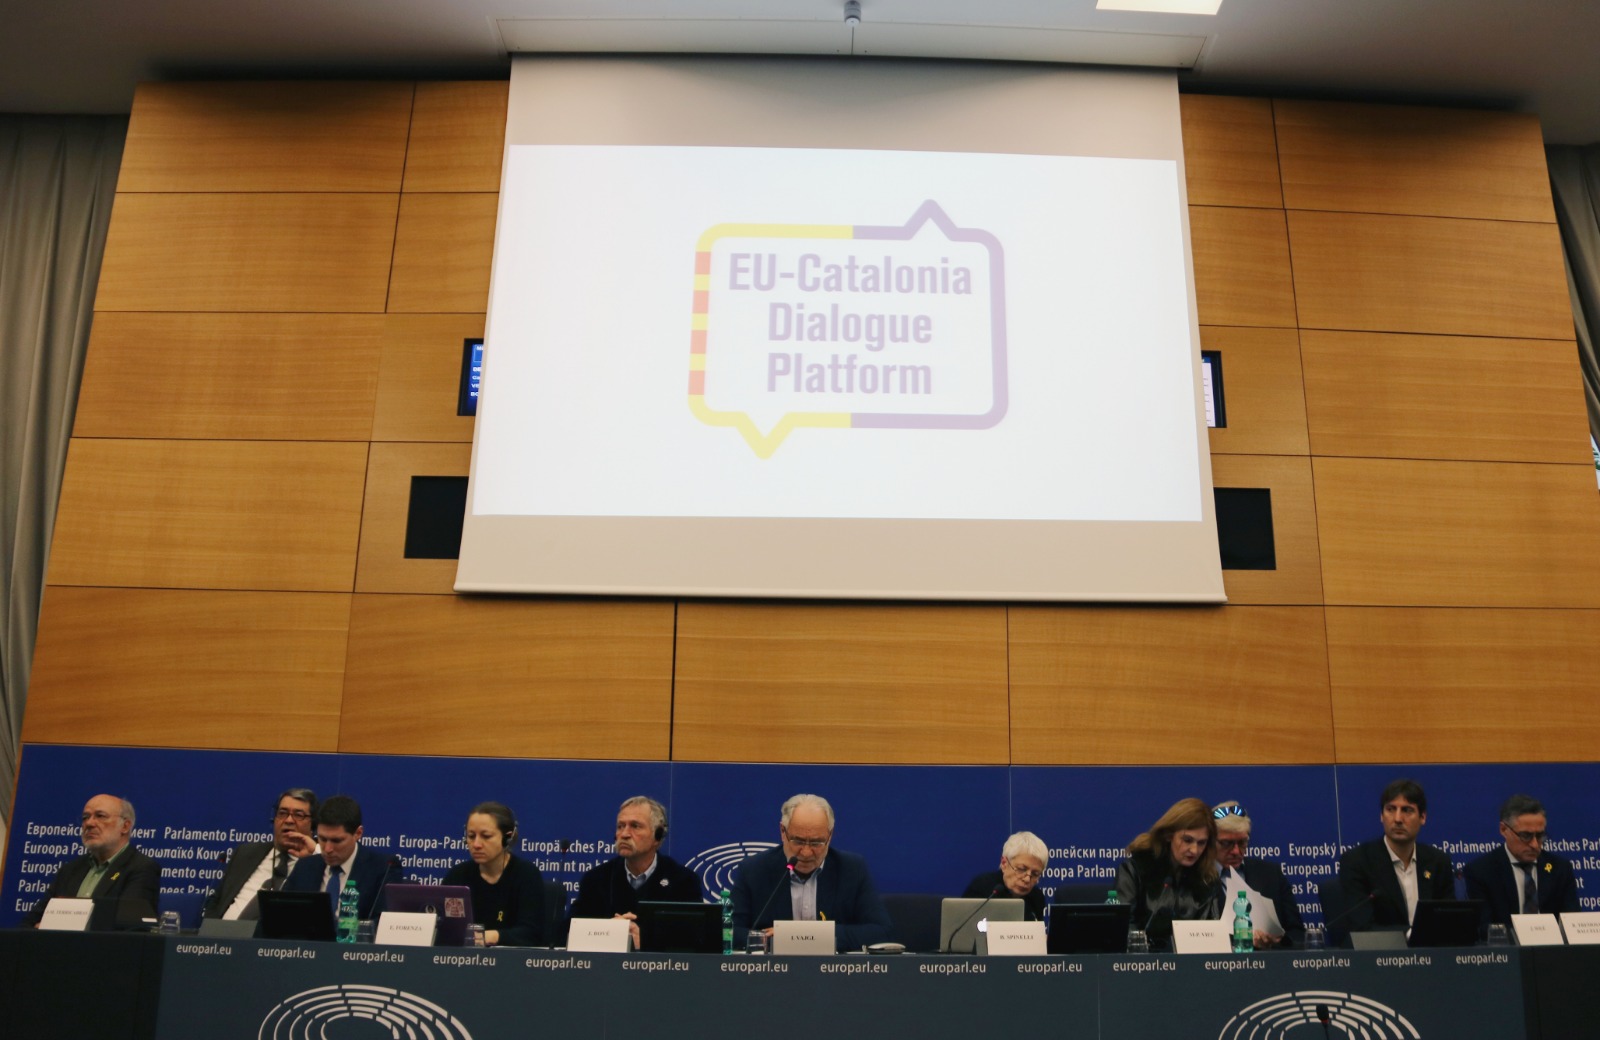 Press conference of the EU-Catalonia Dialogue Platform on the independence trial (by Natàlia Segura) 